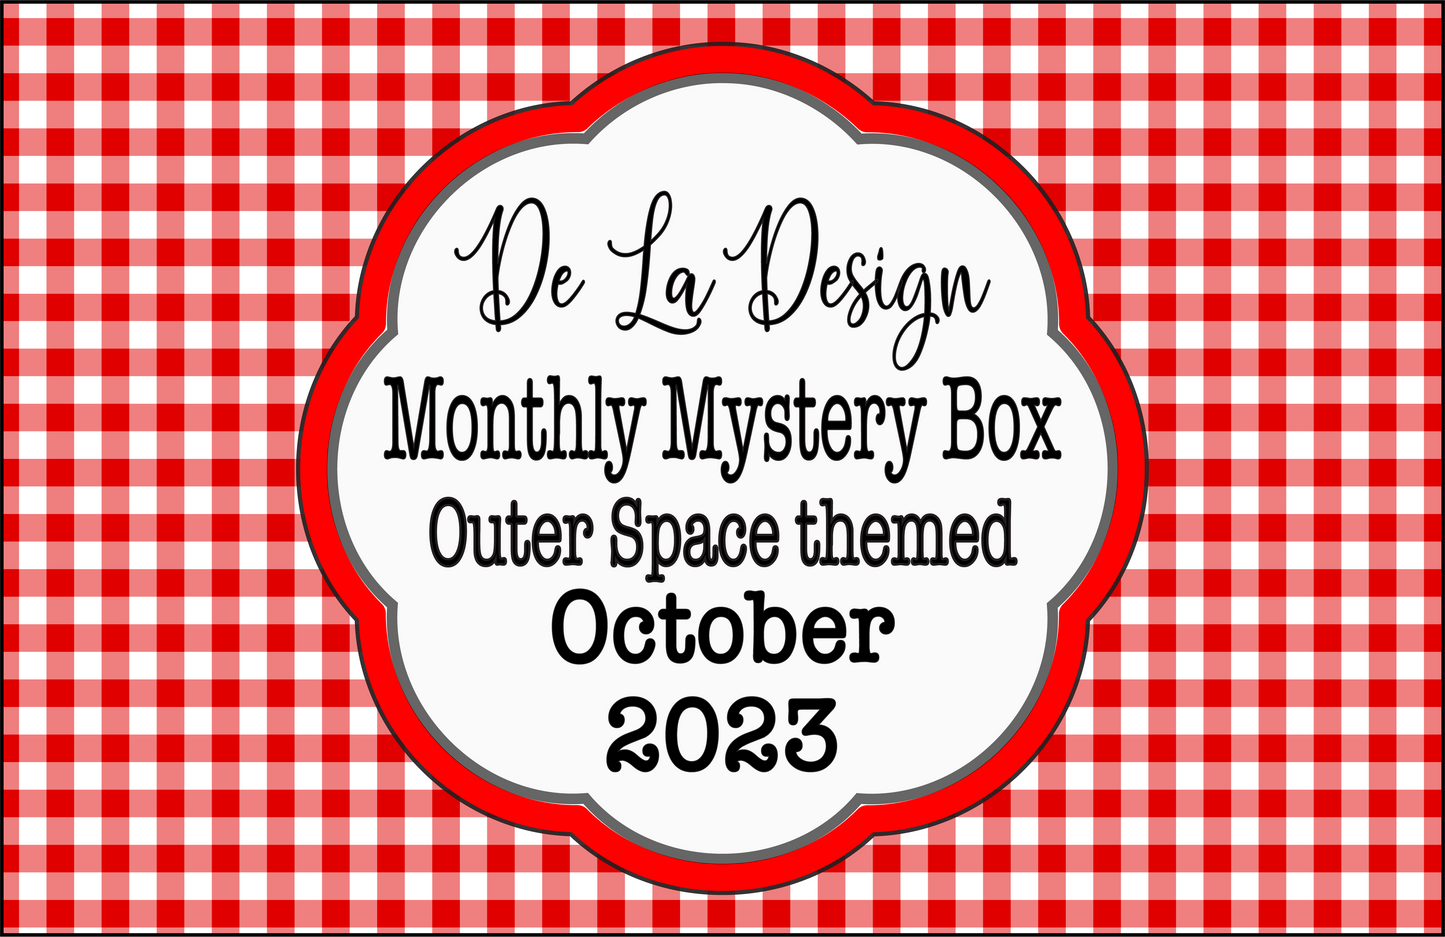 Monthly Mystery Box - October 2023 - Outer Space themed